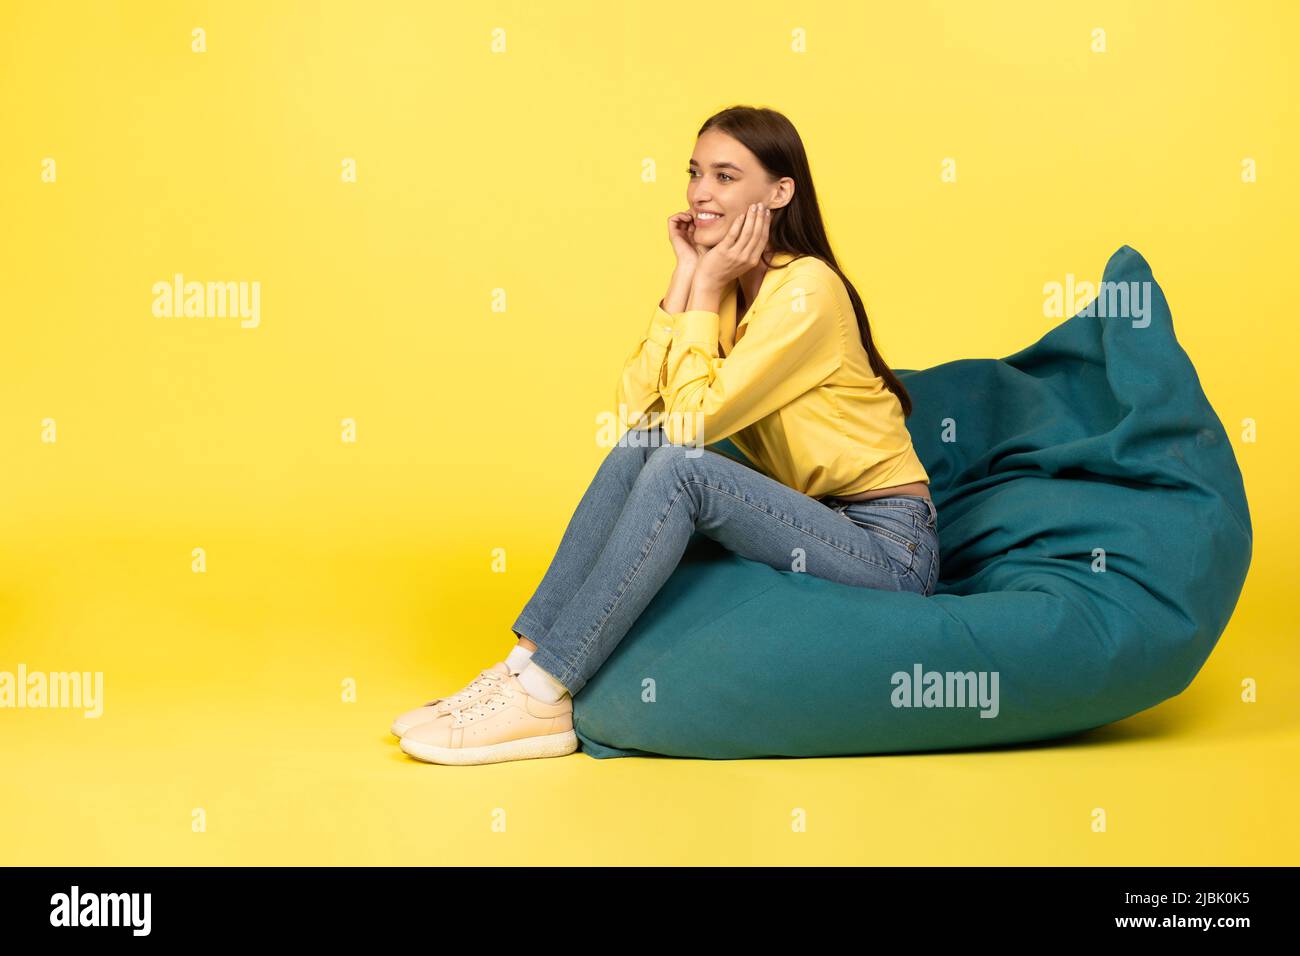 Woman Sitting In Bean Bag Chair Posing Over Yellow Background Stock Photo